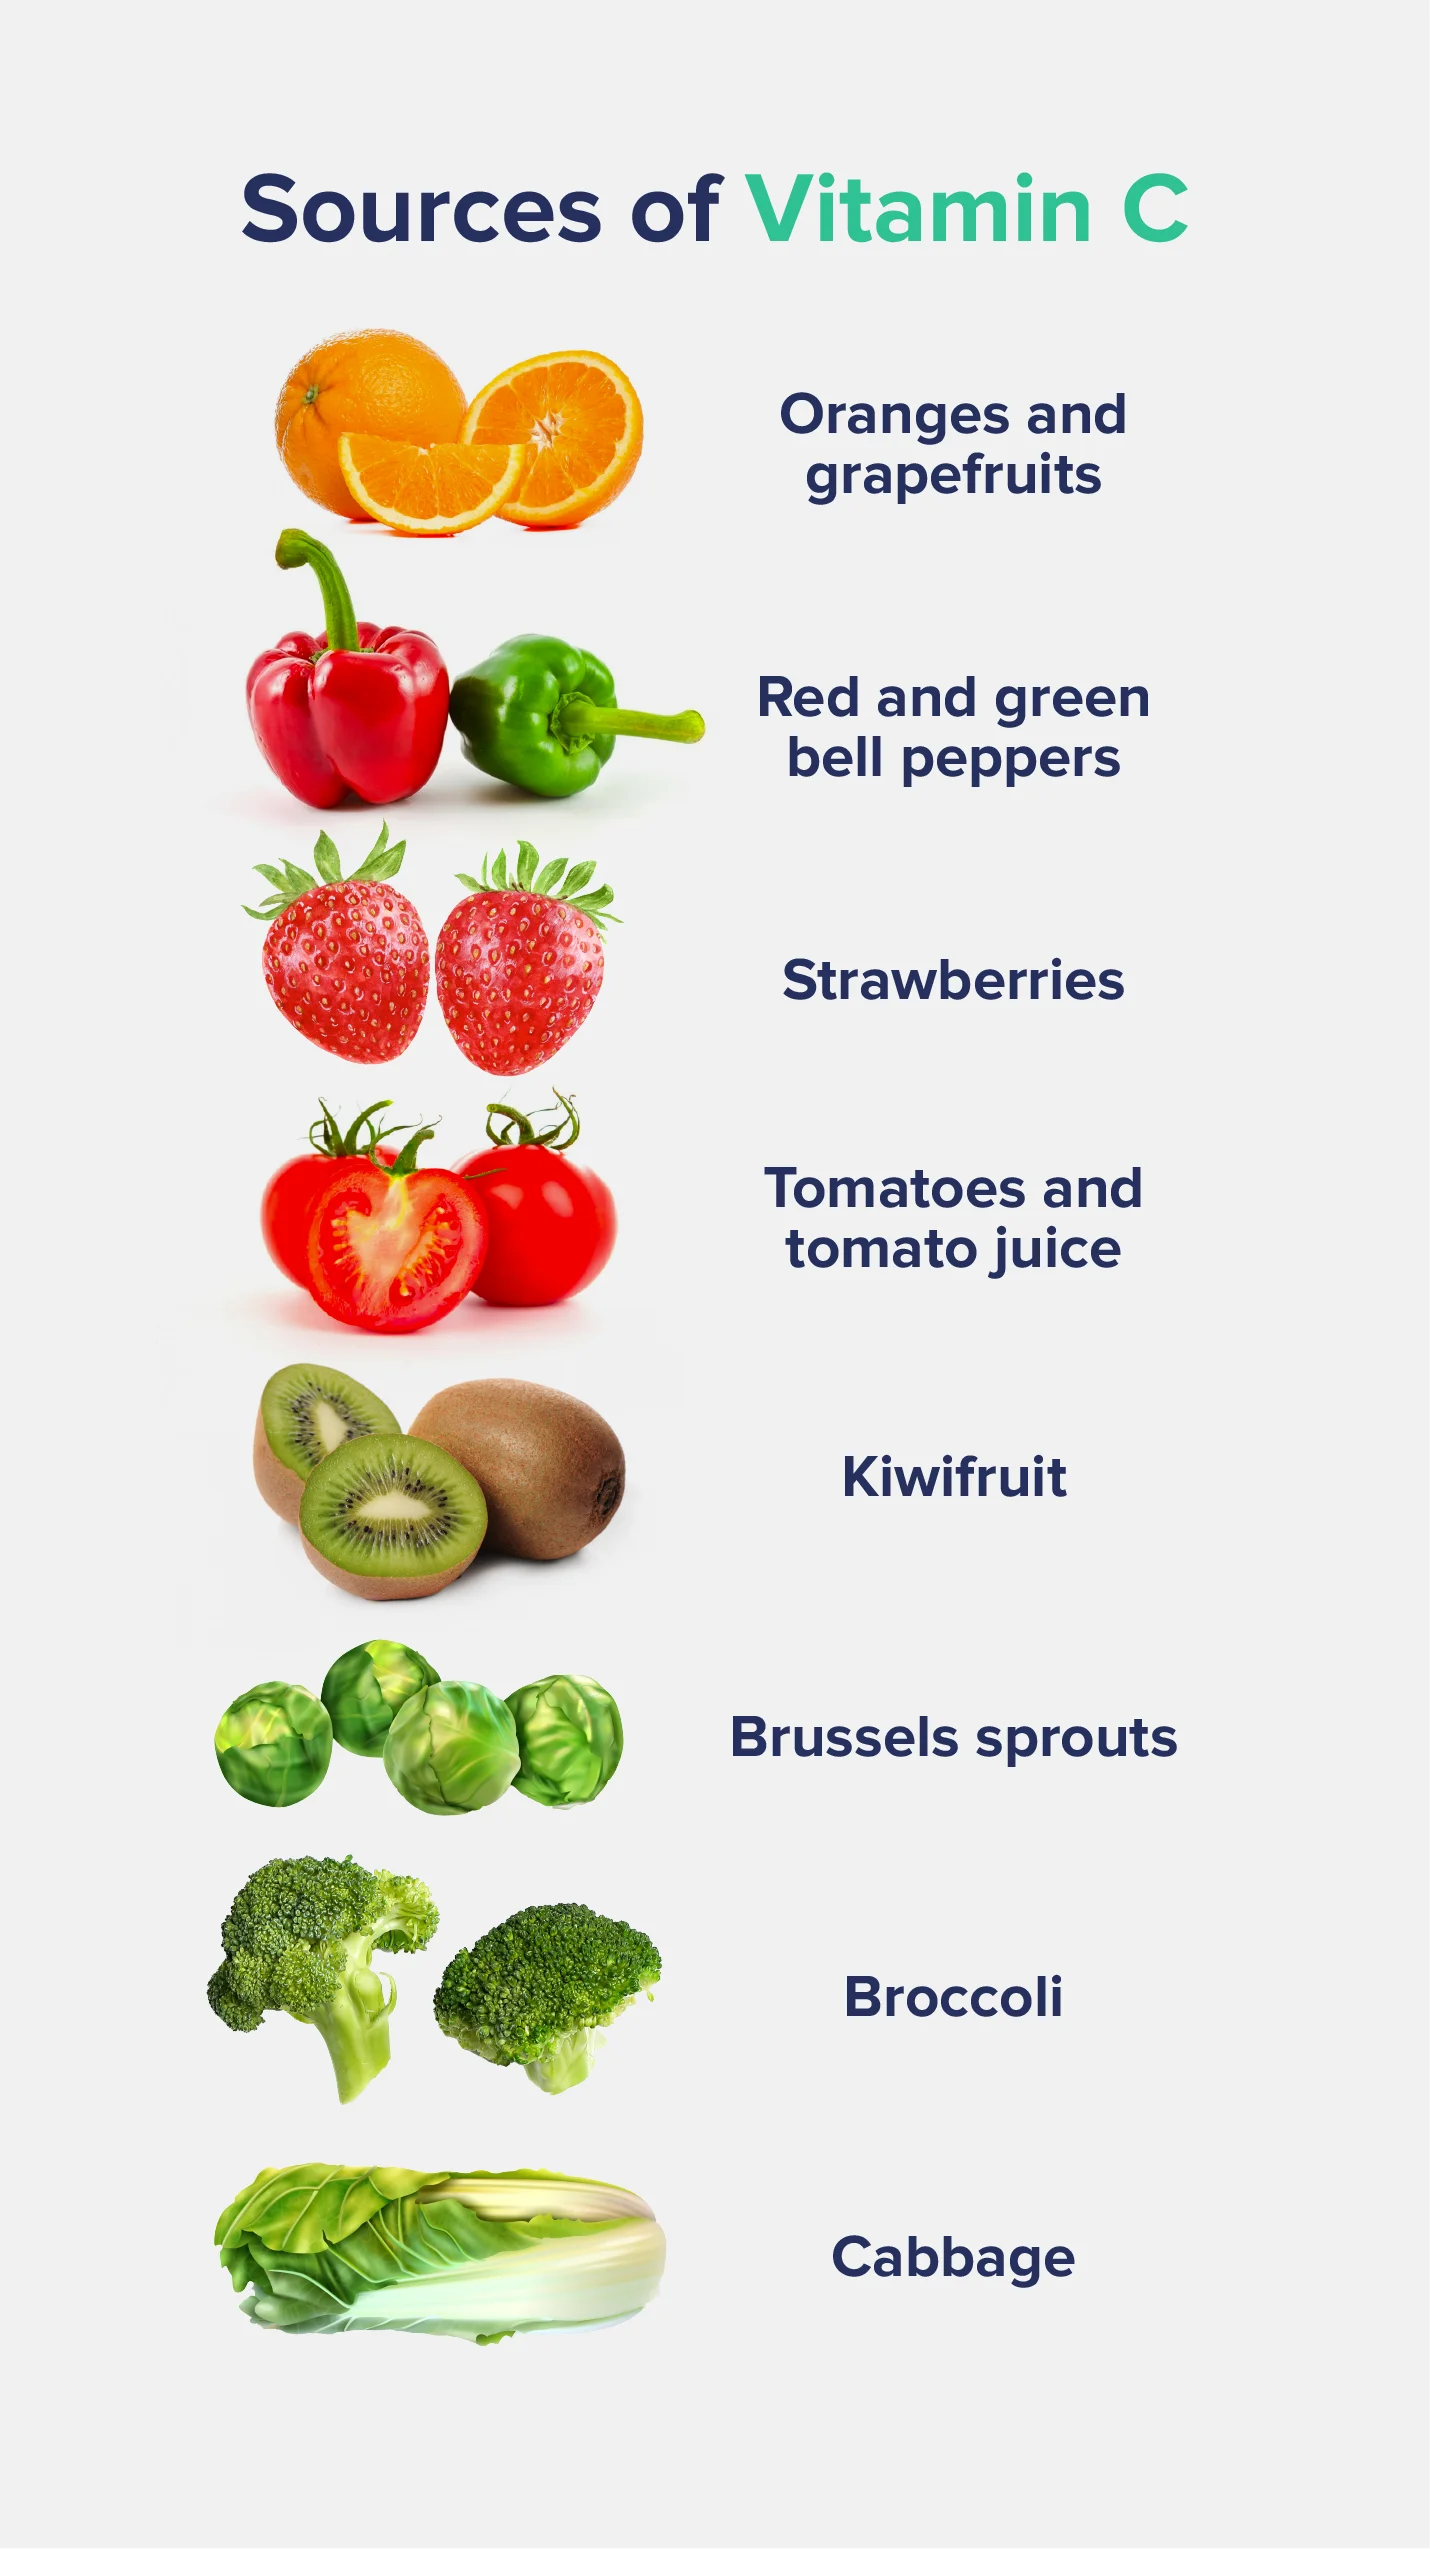 A graphic entitled "Sources of Vitamin C" displaying images of citrus fruits, bell peppers, tomatoes, brussels sprouts, and other foods rich in vitamin C